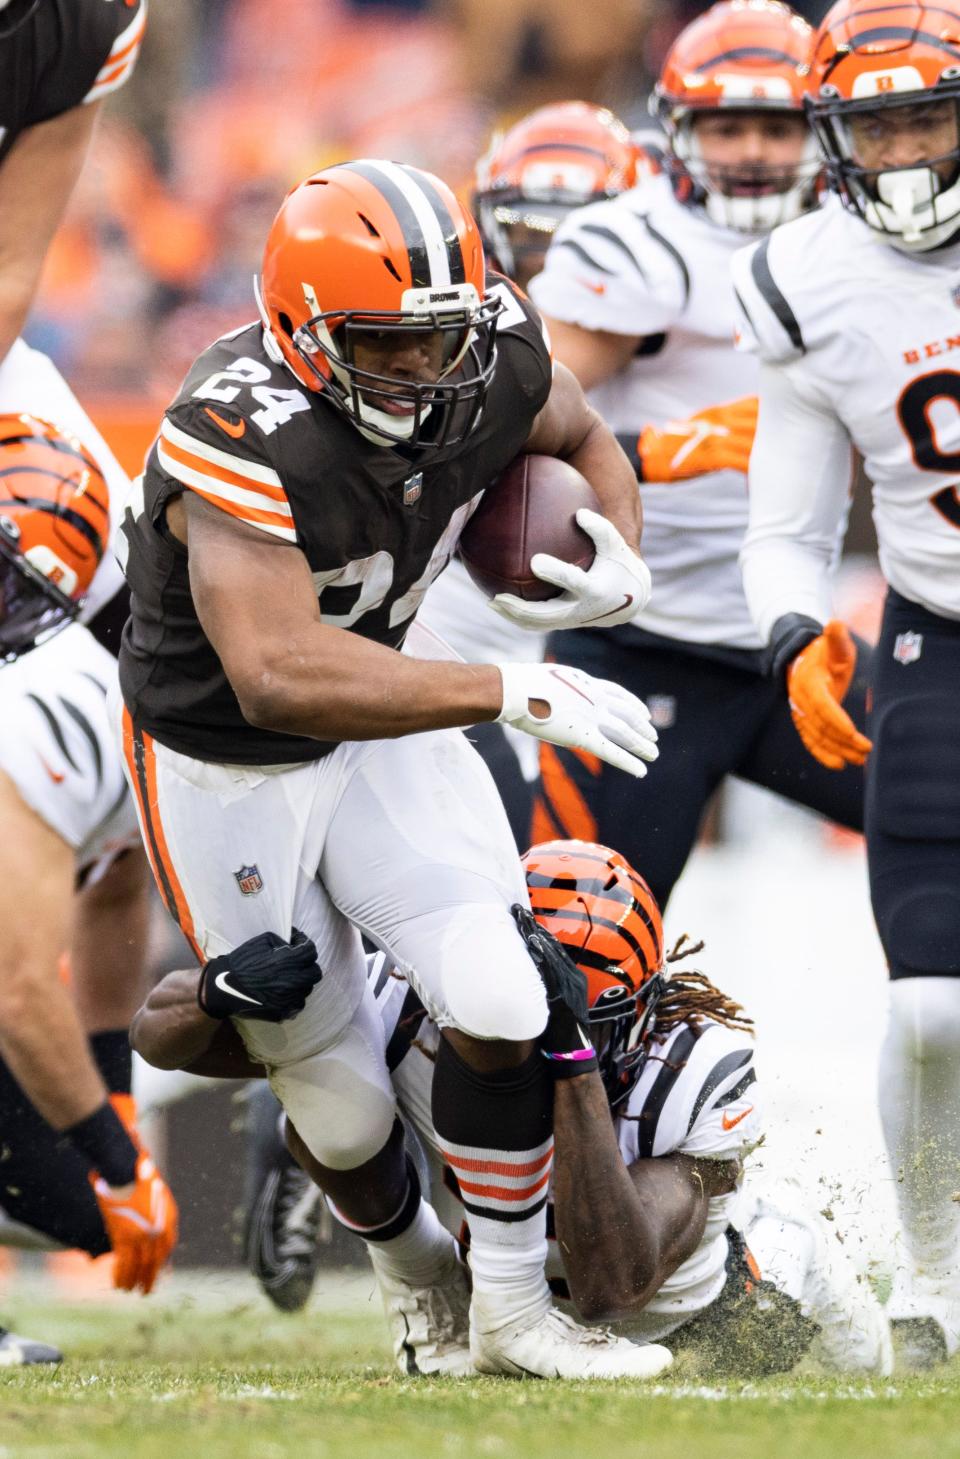 Browns running back Nick Chubb named to All-NFL team after being snubbed by a quirk in the All-Pro vote. Scott Galvin-USA TODAY Sports